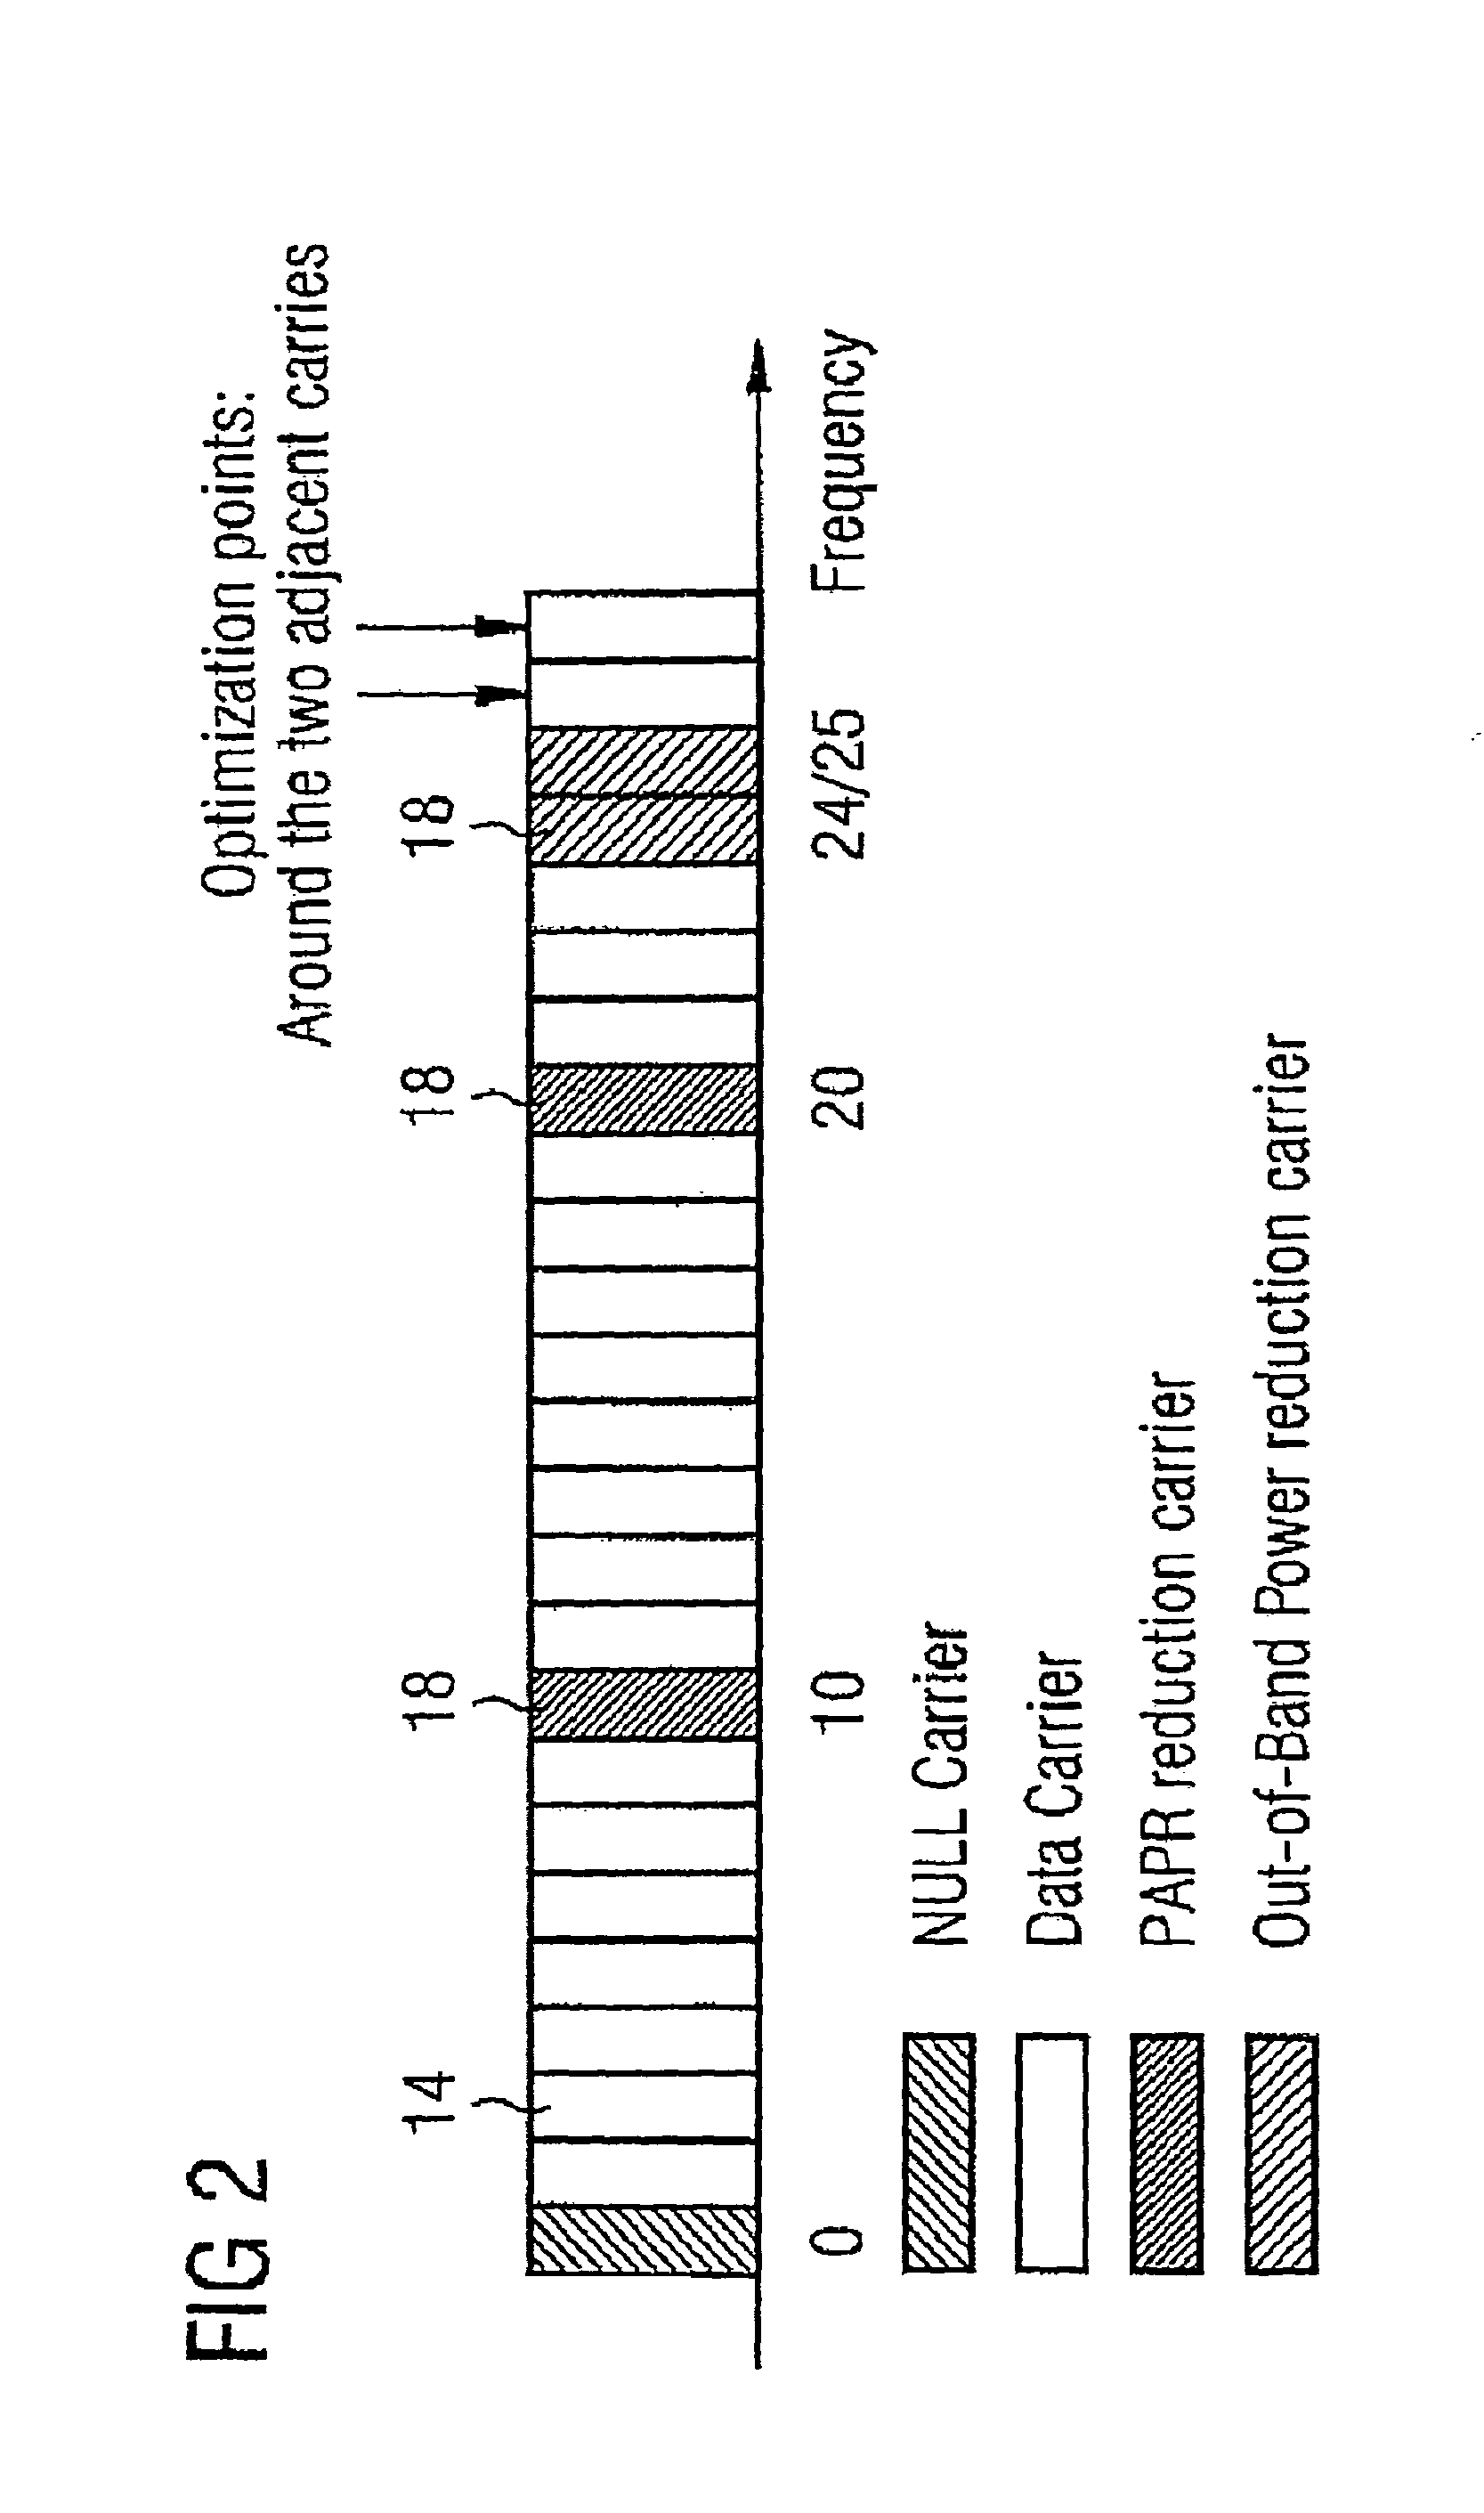 Method for optimizing signals with multiple subcarriers